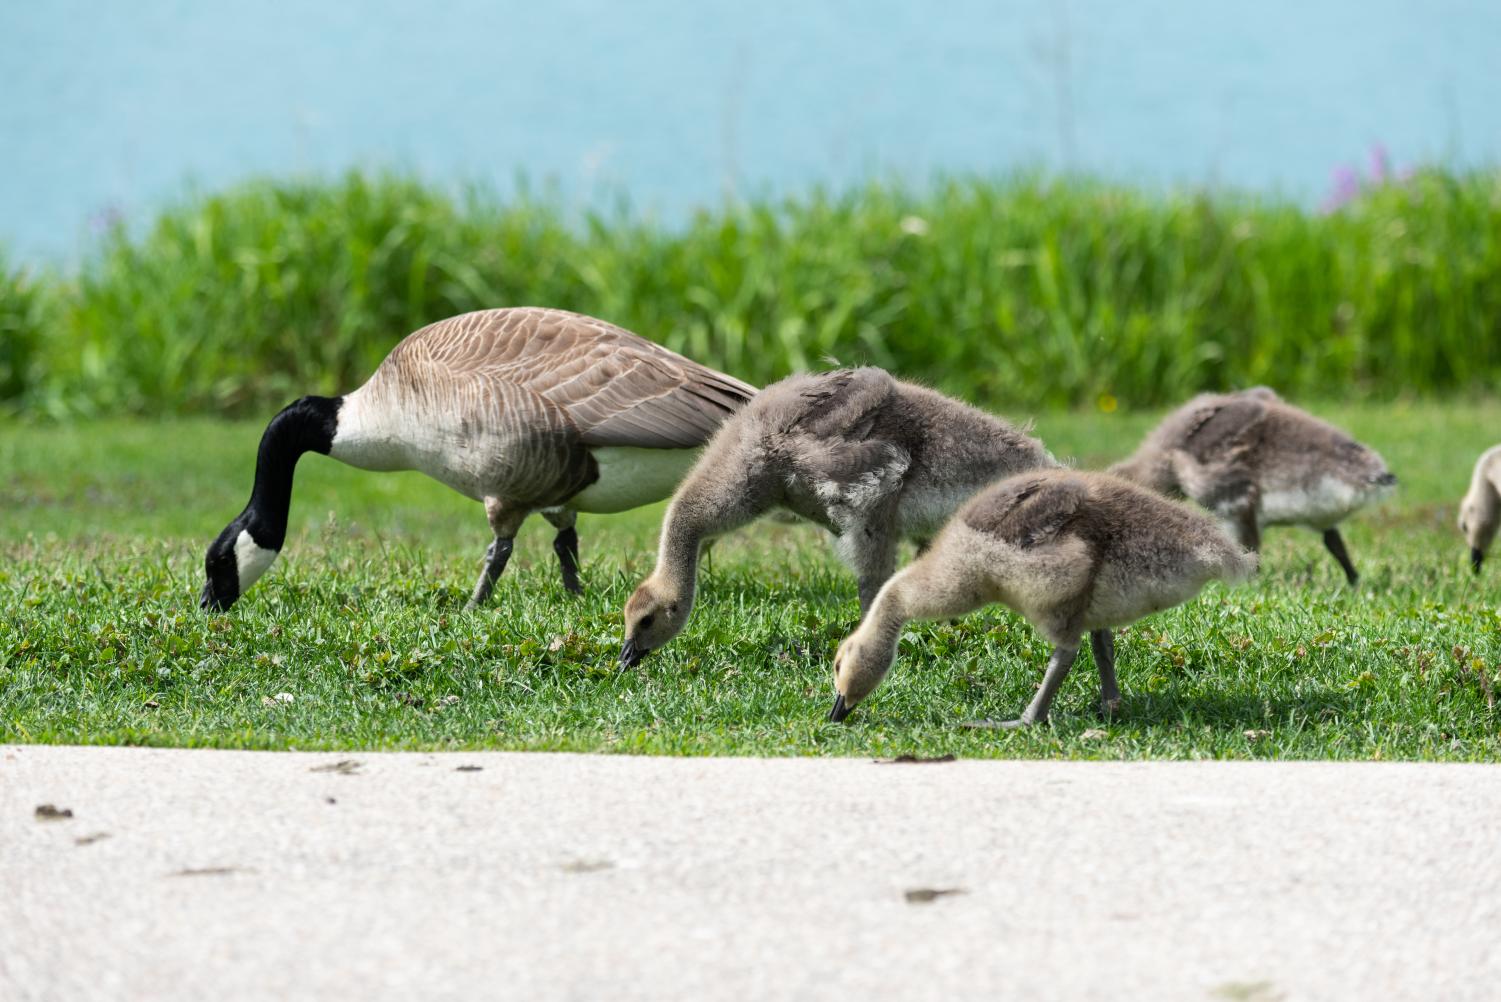 Goslings and a goose walk on grass with water in the background.